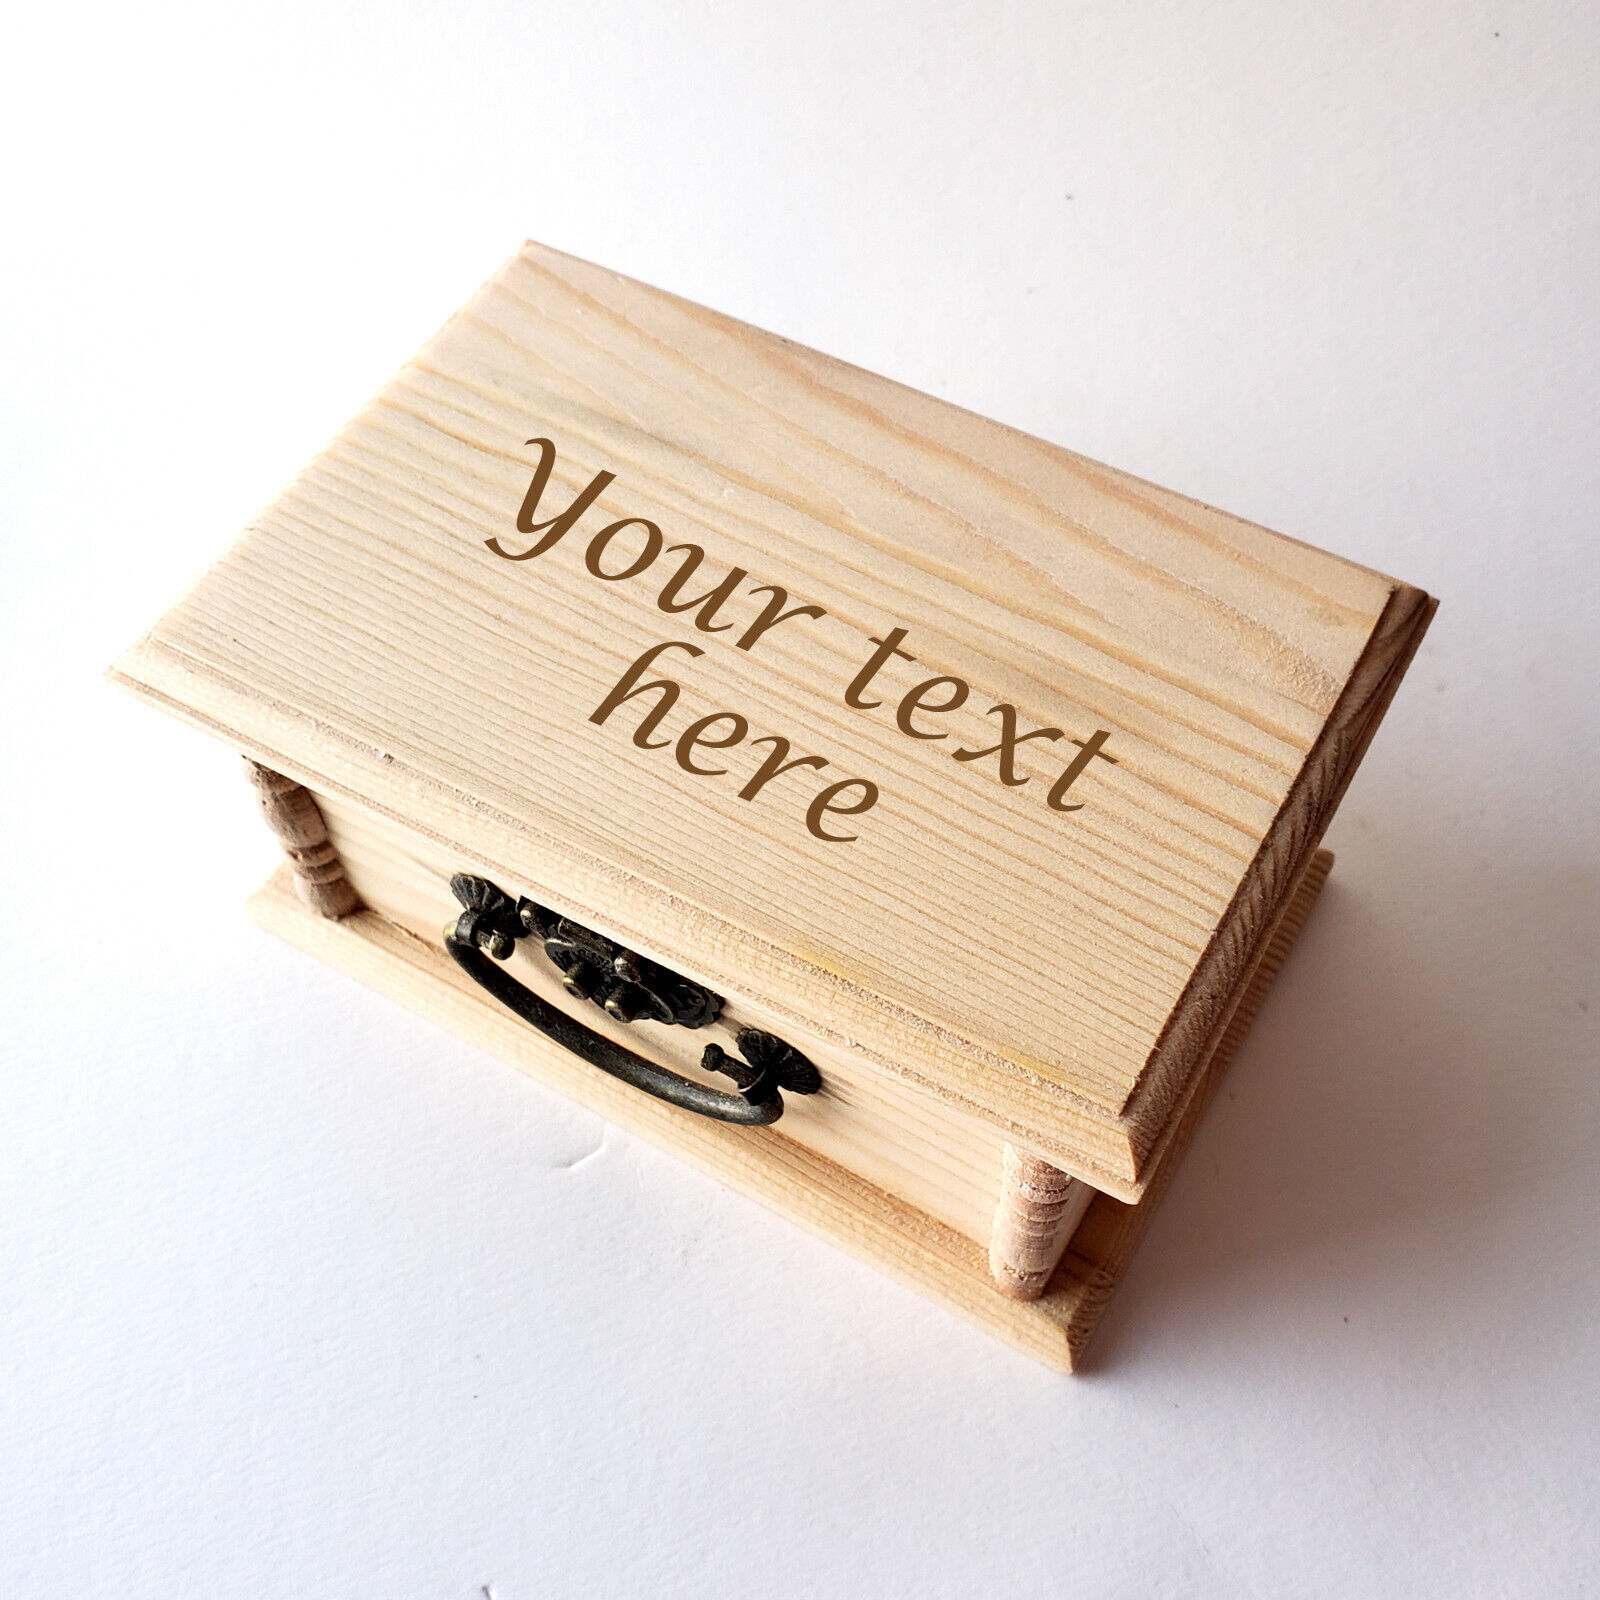 Custom Text Latched Wooden Box, Free Engraved Personalization, Small Carved Box